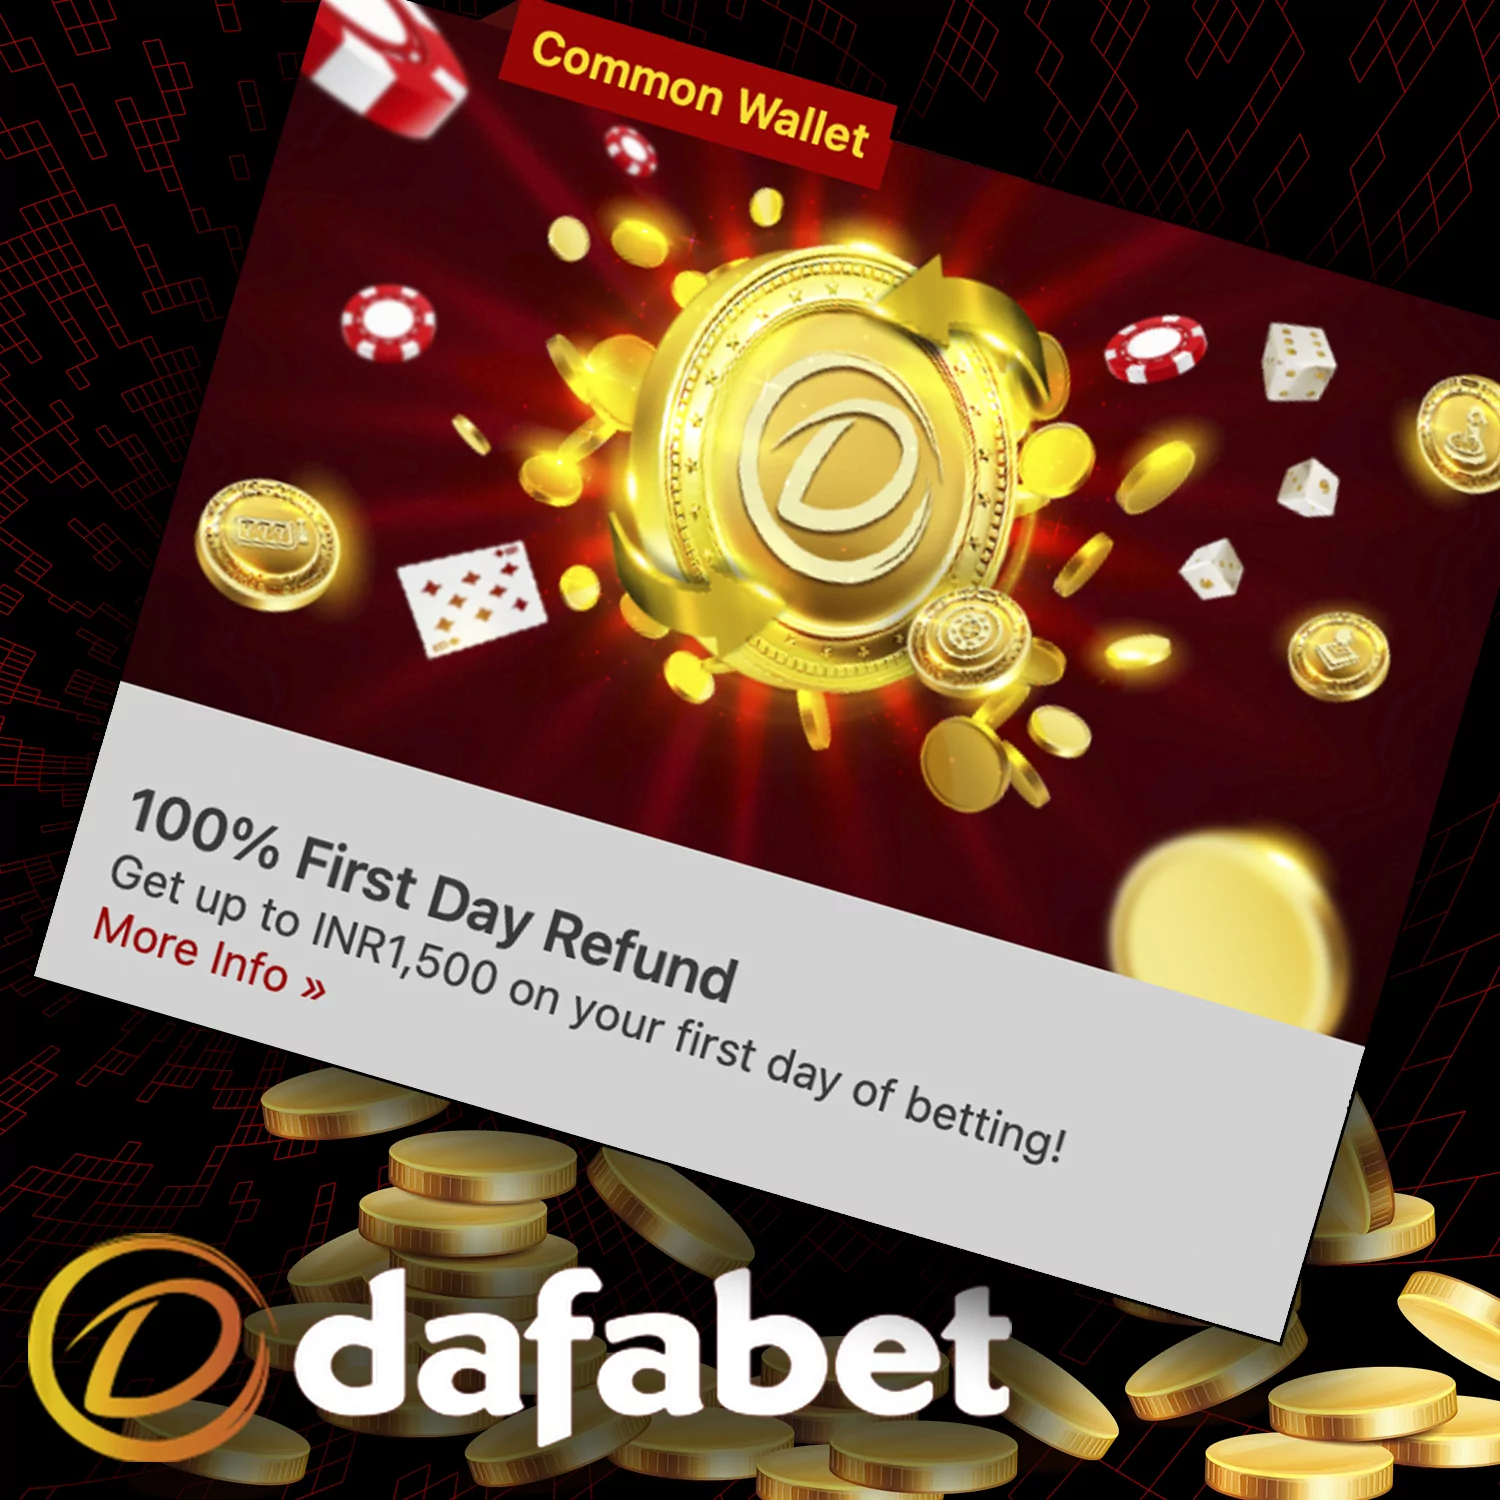 You'll get a 100% refund for the first day at Dafabet of up to INR 1,500.